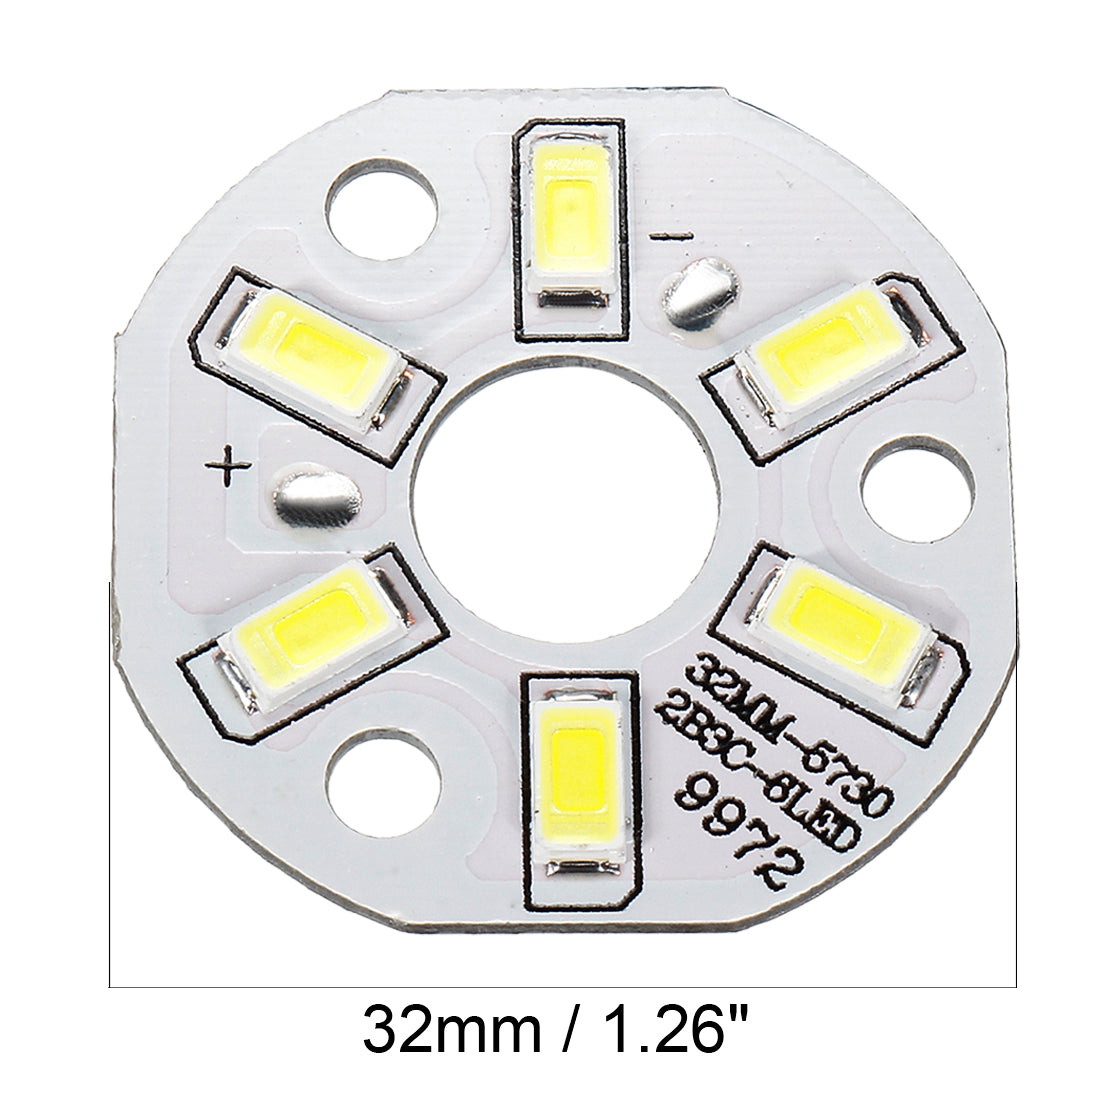 uxcell Uxcell 300mA 3W 6 LEDs 5730 Surface Mounted Devices LED Chip Module Aluminum Board Pure White Super Bright 32mm Dia 5pcs